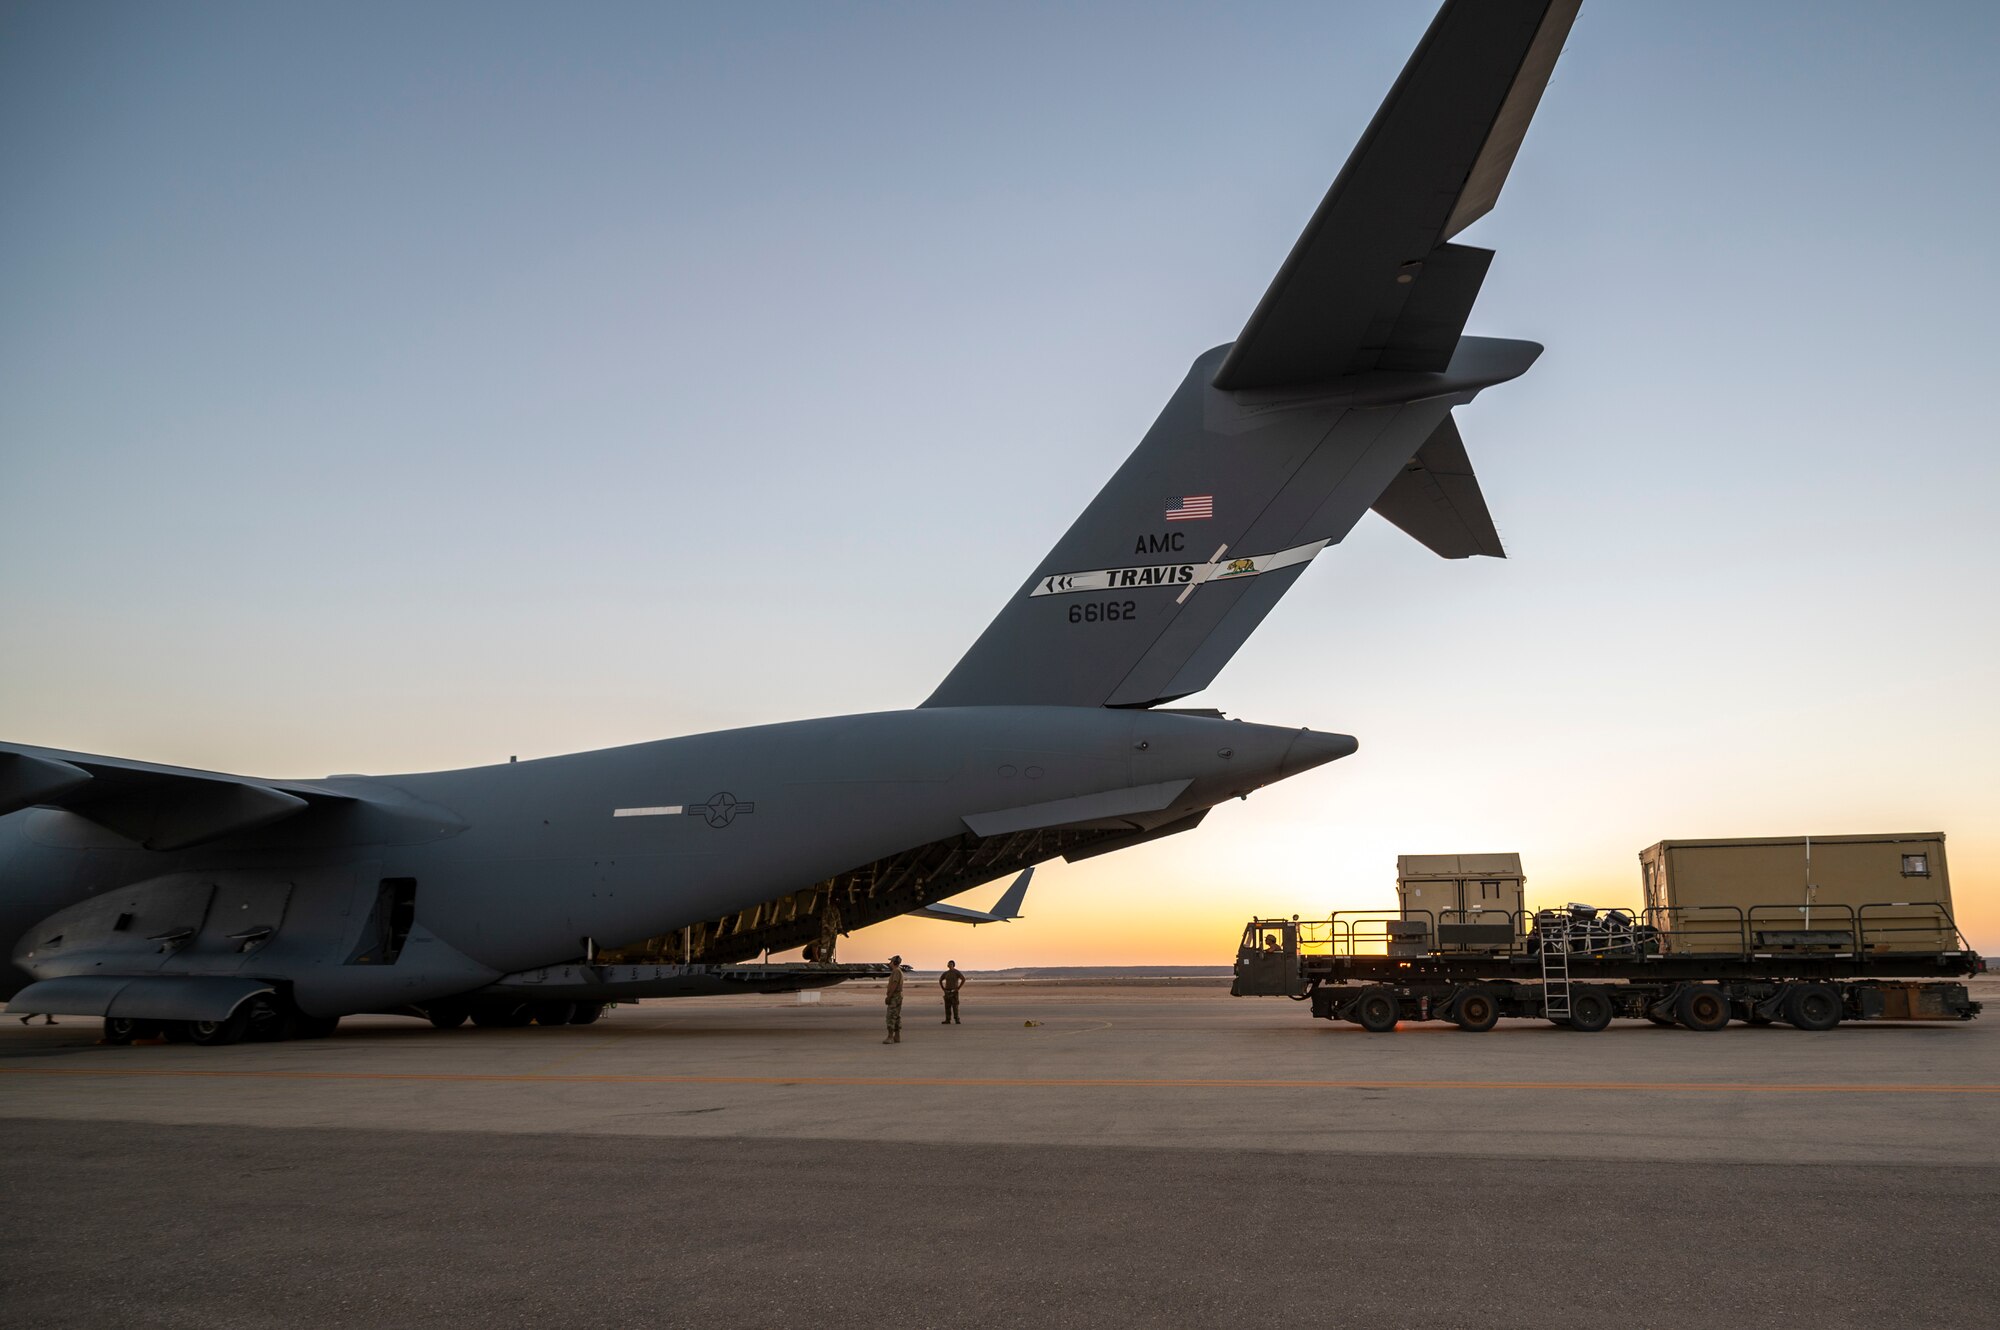 The C-17, from Travis Air Force Base, California, delivered equipment for the 26th Expeditionary Rescue Squadron in support of the 332nd Air Expeditionary Wing’s mission.